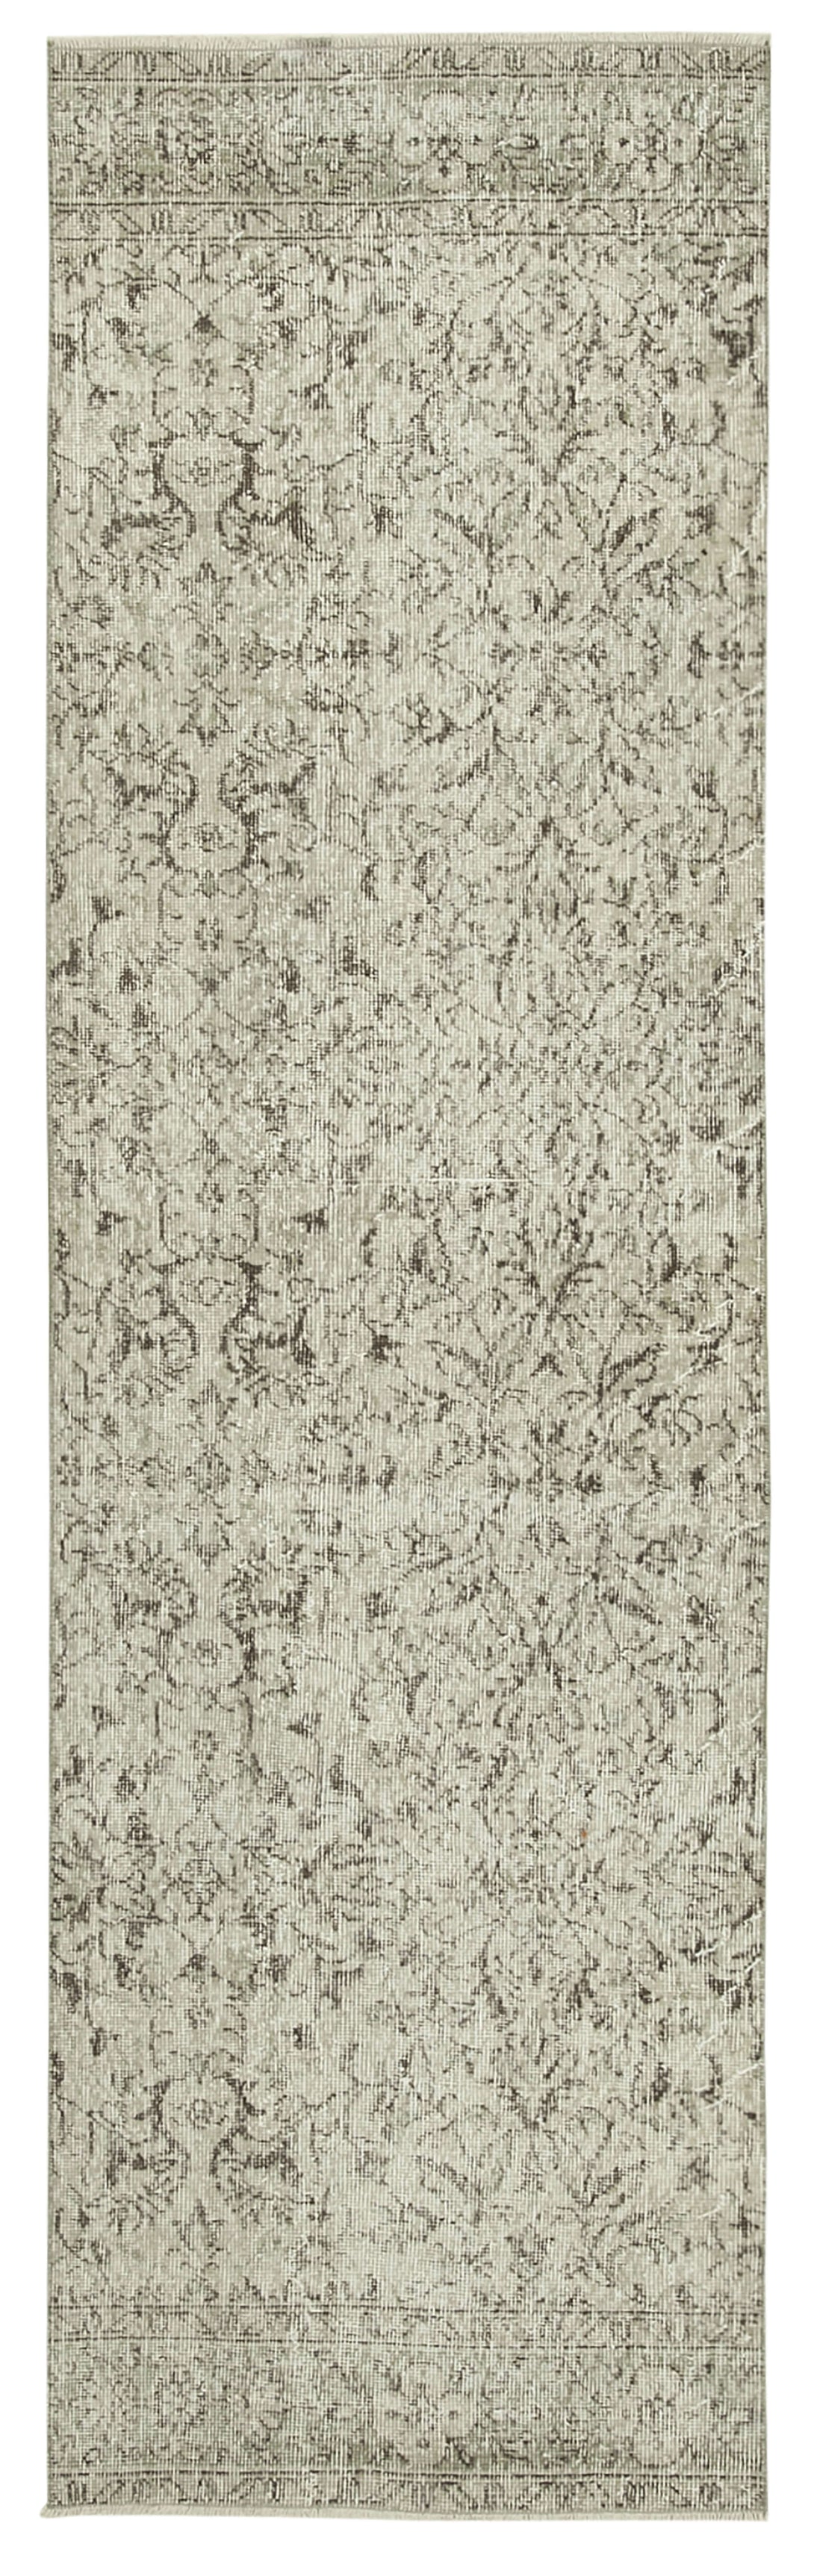 Handmade Overdyed Runner > Design# OL-AC-38168 > Size: 2'-8" x 8'-11", Carpet Culture Rugs, Handmade Rugs, NYC Rugs, New Rugs, Shop Rugs, Rug Store, Outlet Rugs, SoHo Rugs, Rugs in USA